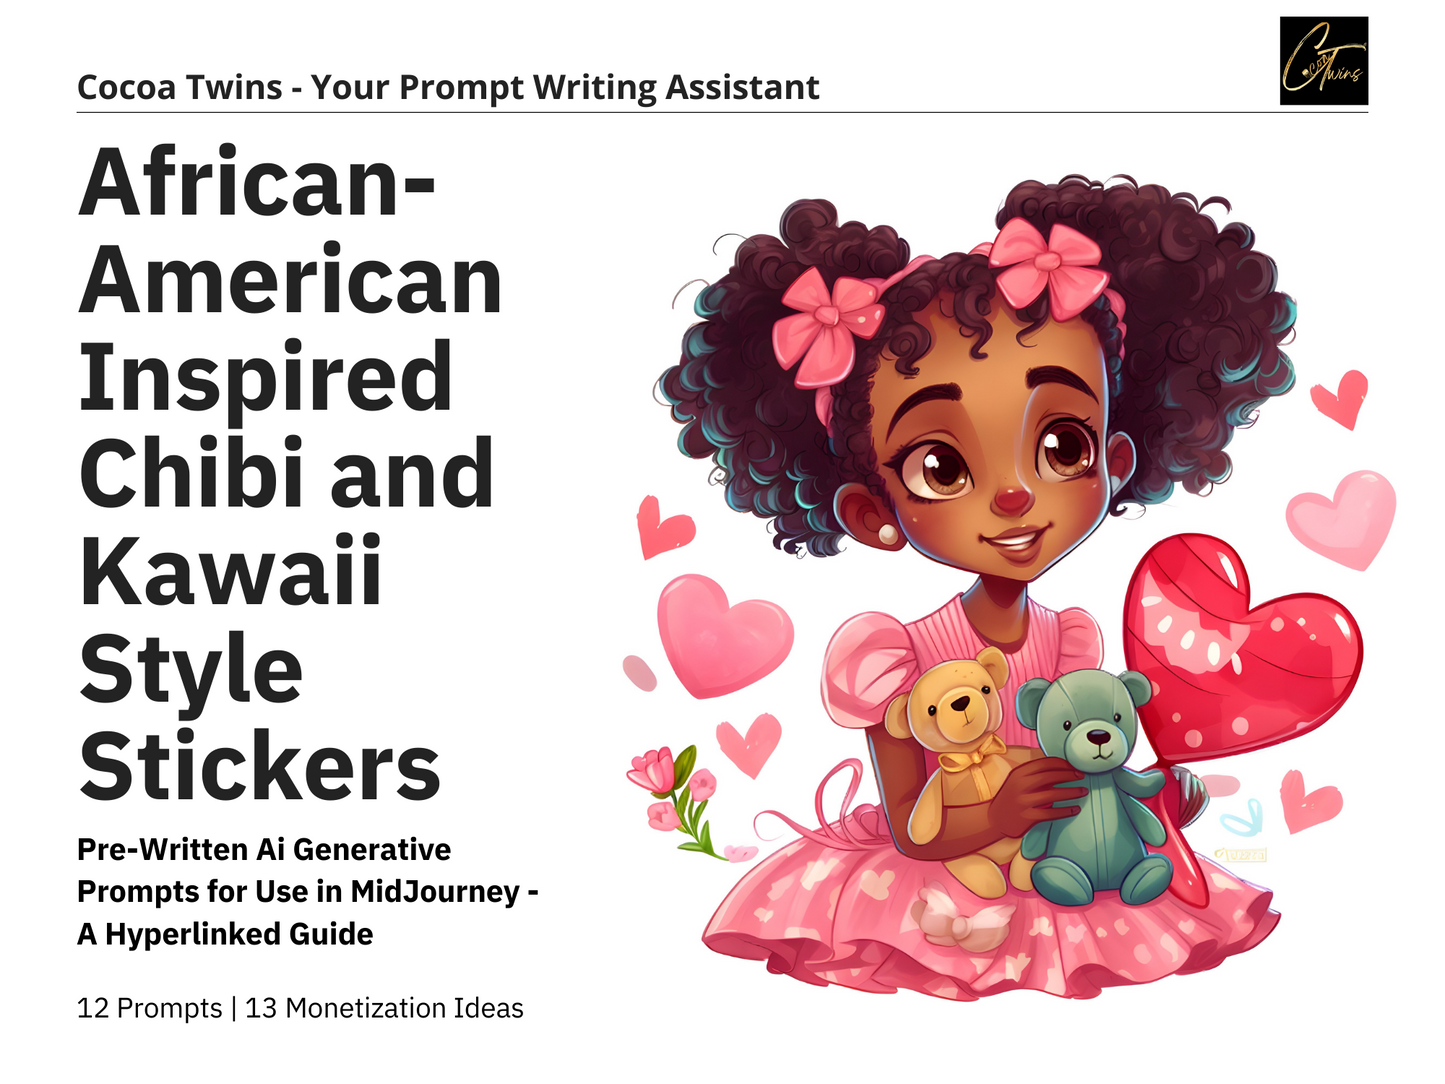 Twelve Prompts - MidJourney Guide - African-American Inspired Chibi and Kawaii Style Stickers